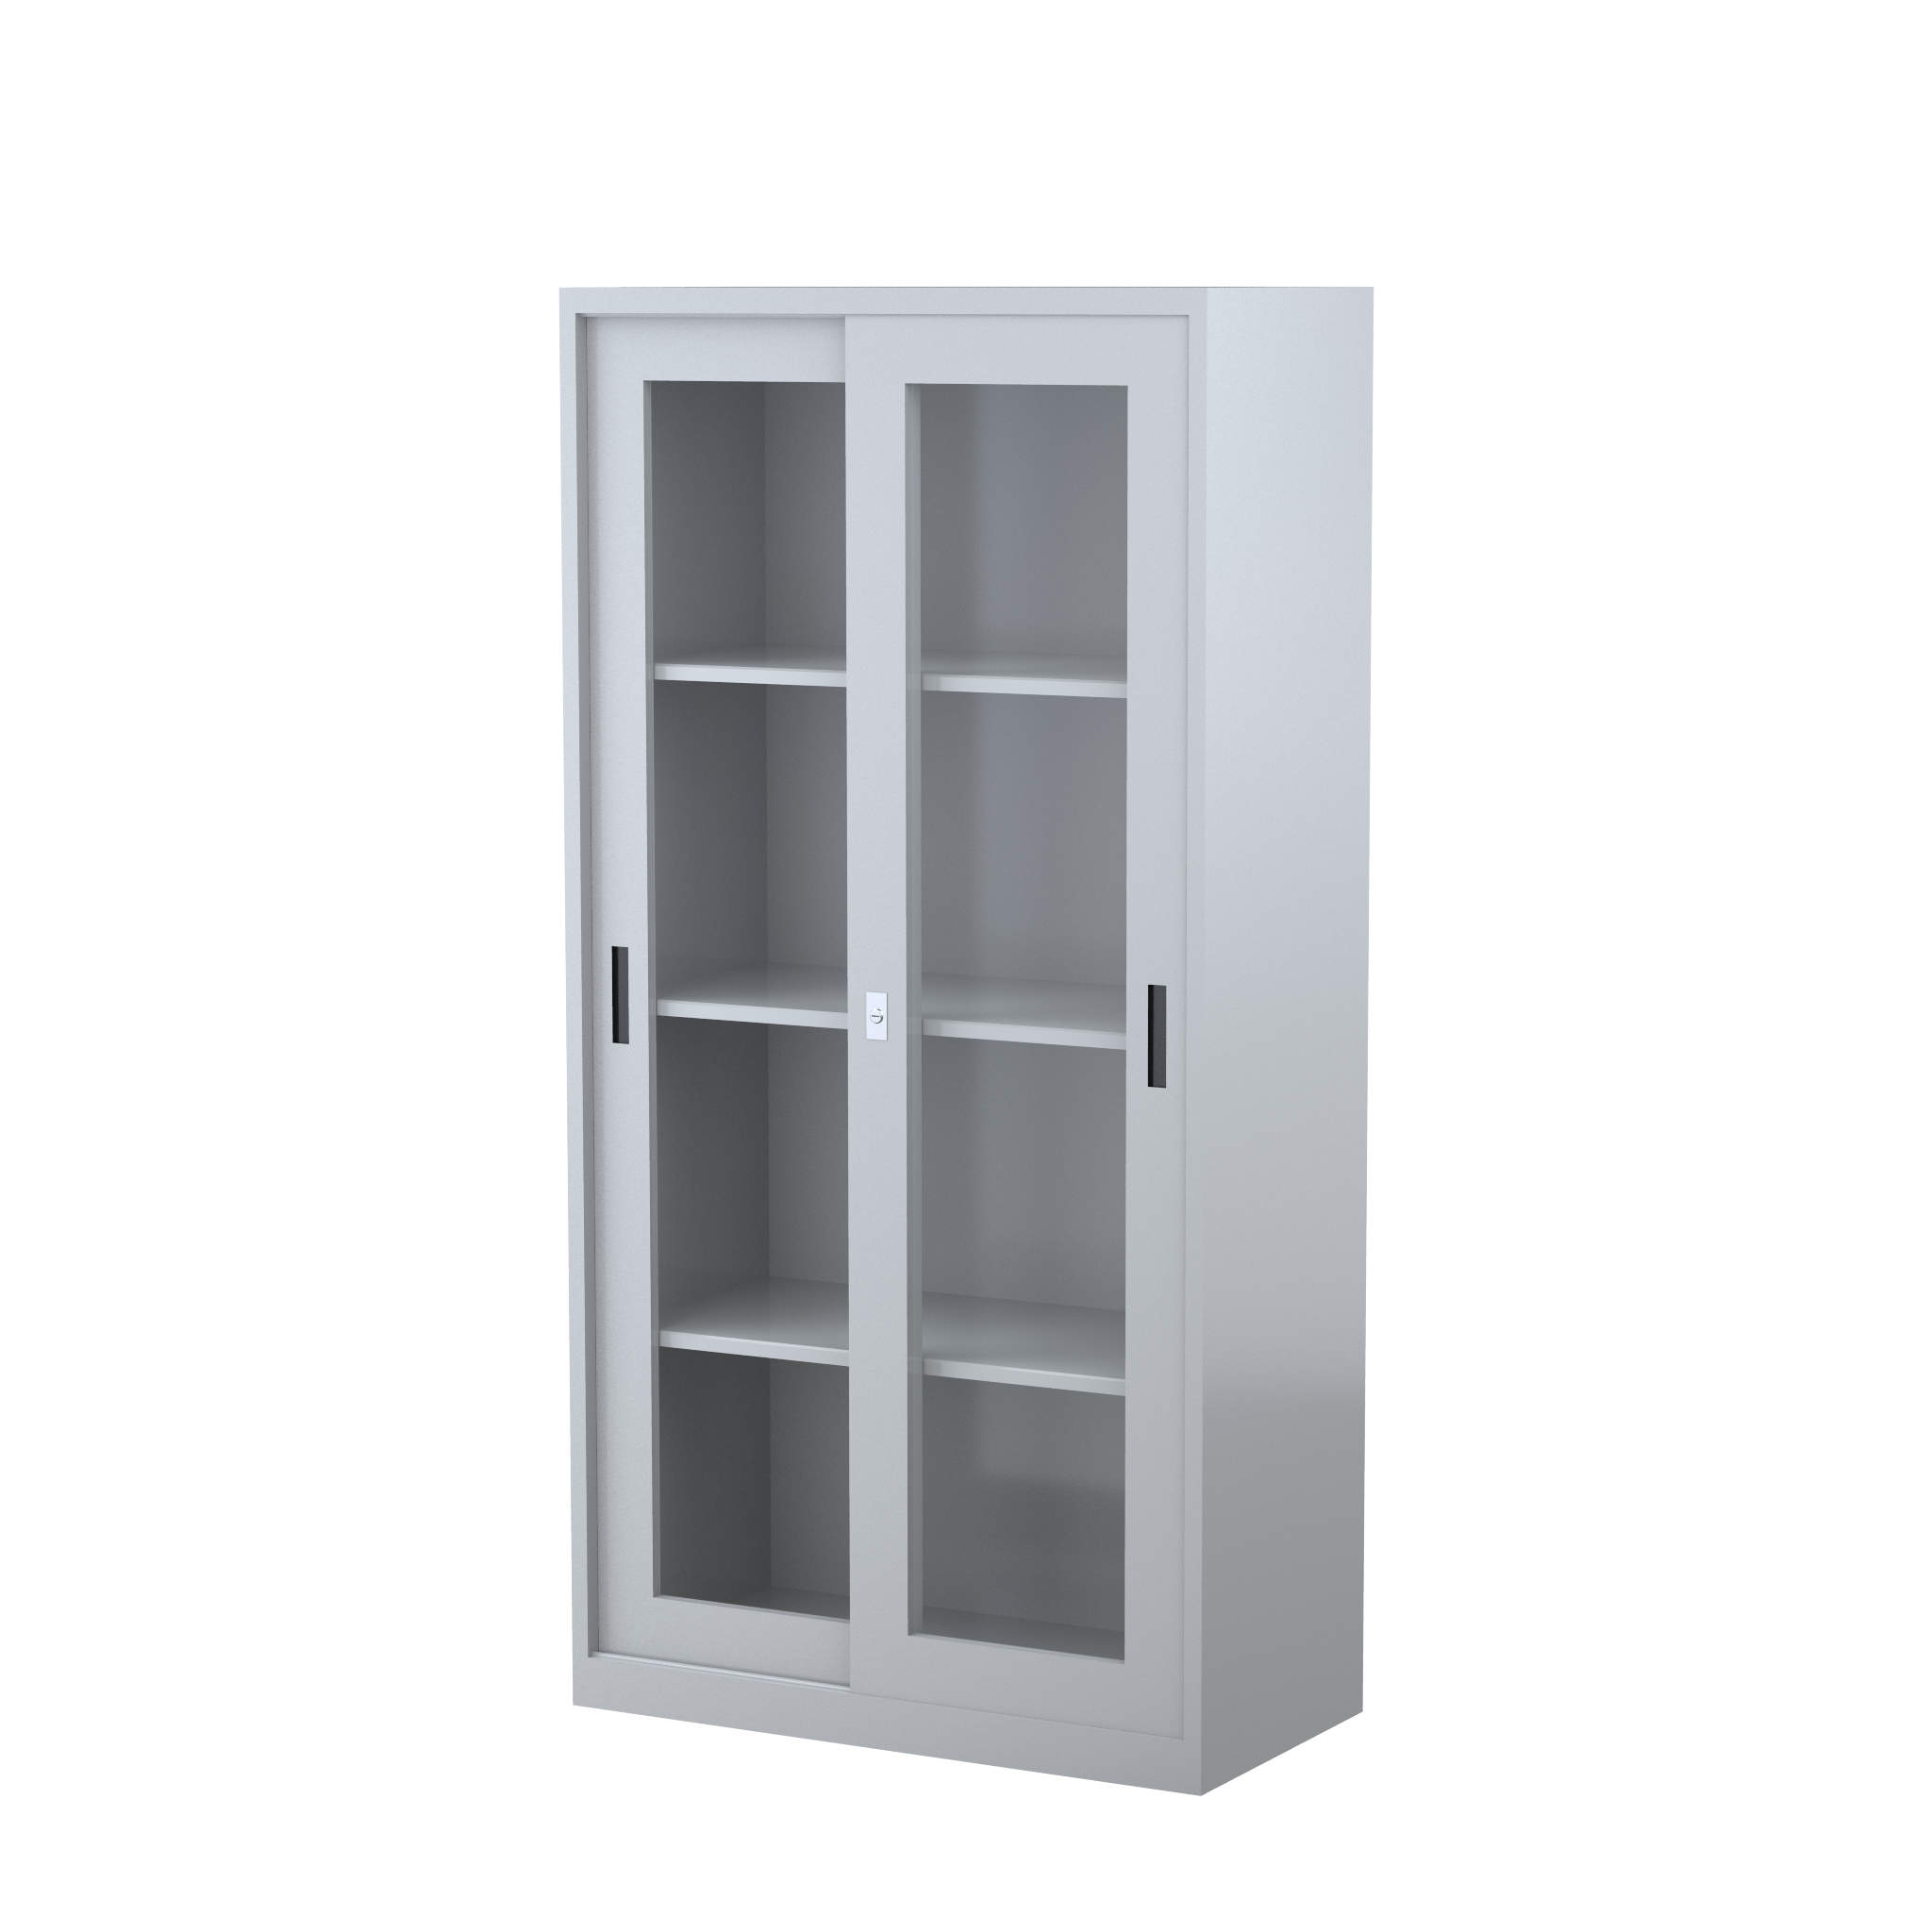 GD1830_914 - STEELCO SG Cabinet 1830H x 914W x 465D - 3 Shelves-SG.png